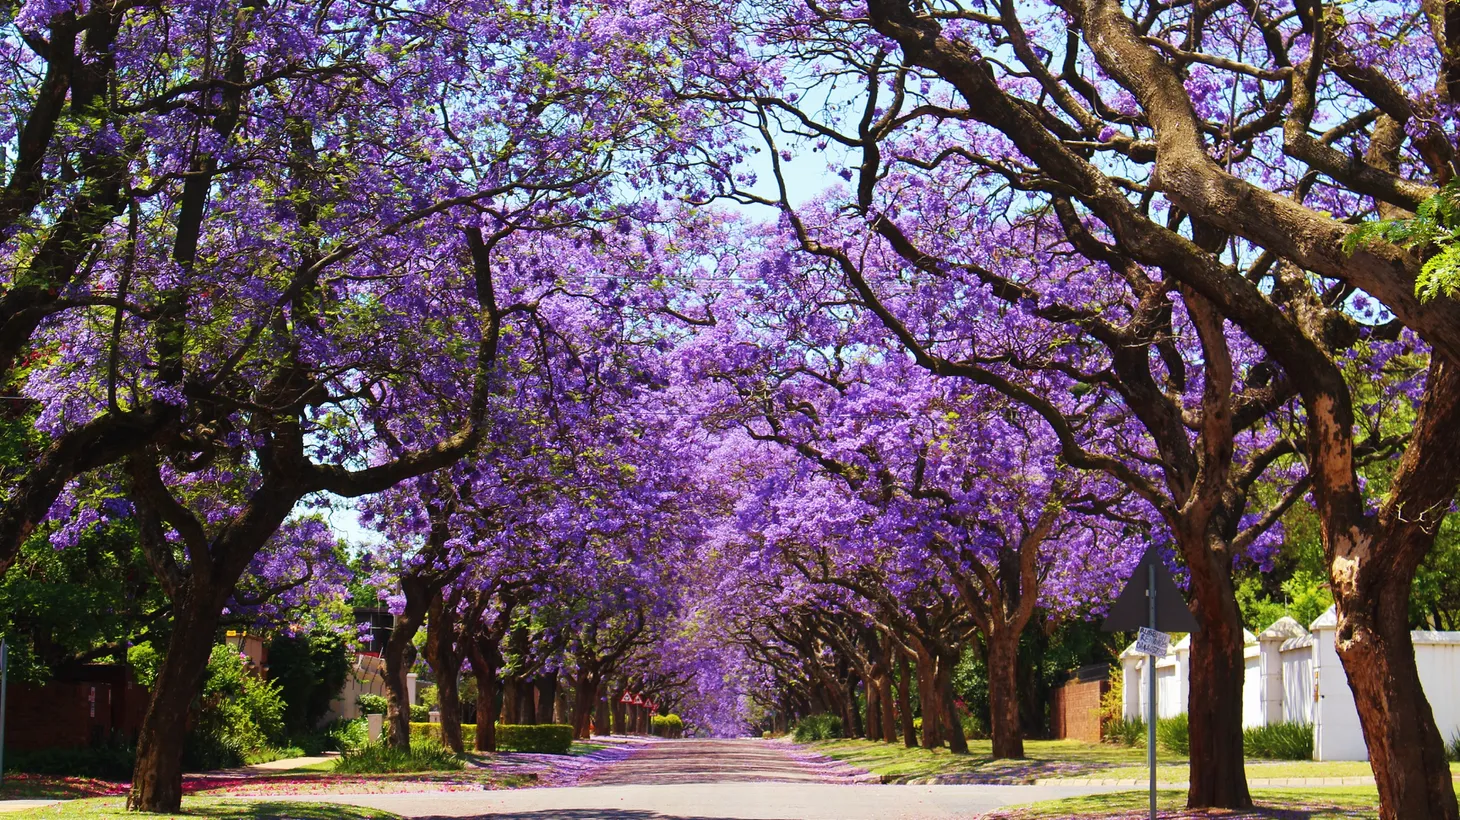 Jacaranda trees are known for their distinctive purple colors and sweet smell.